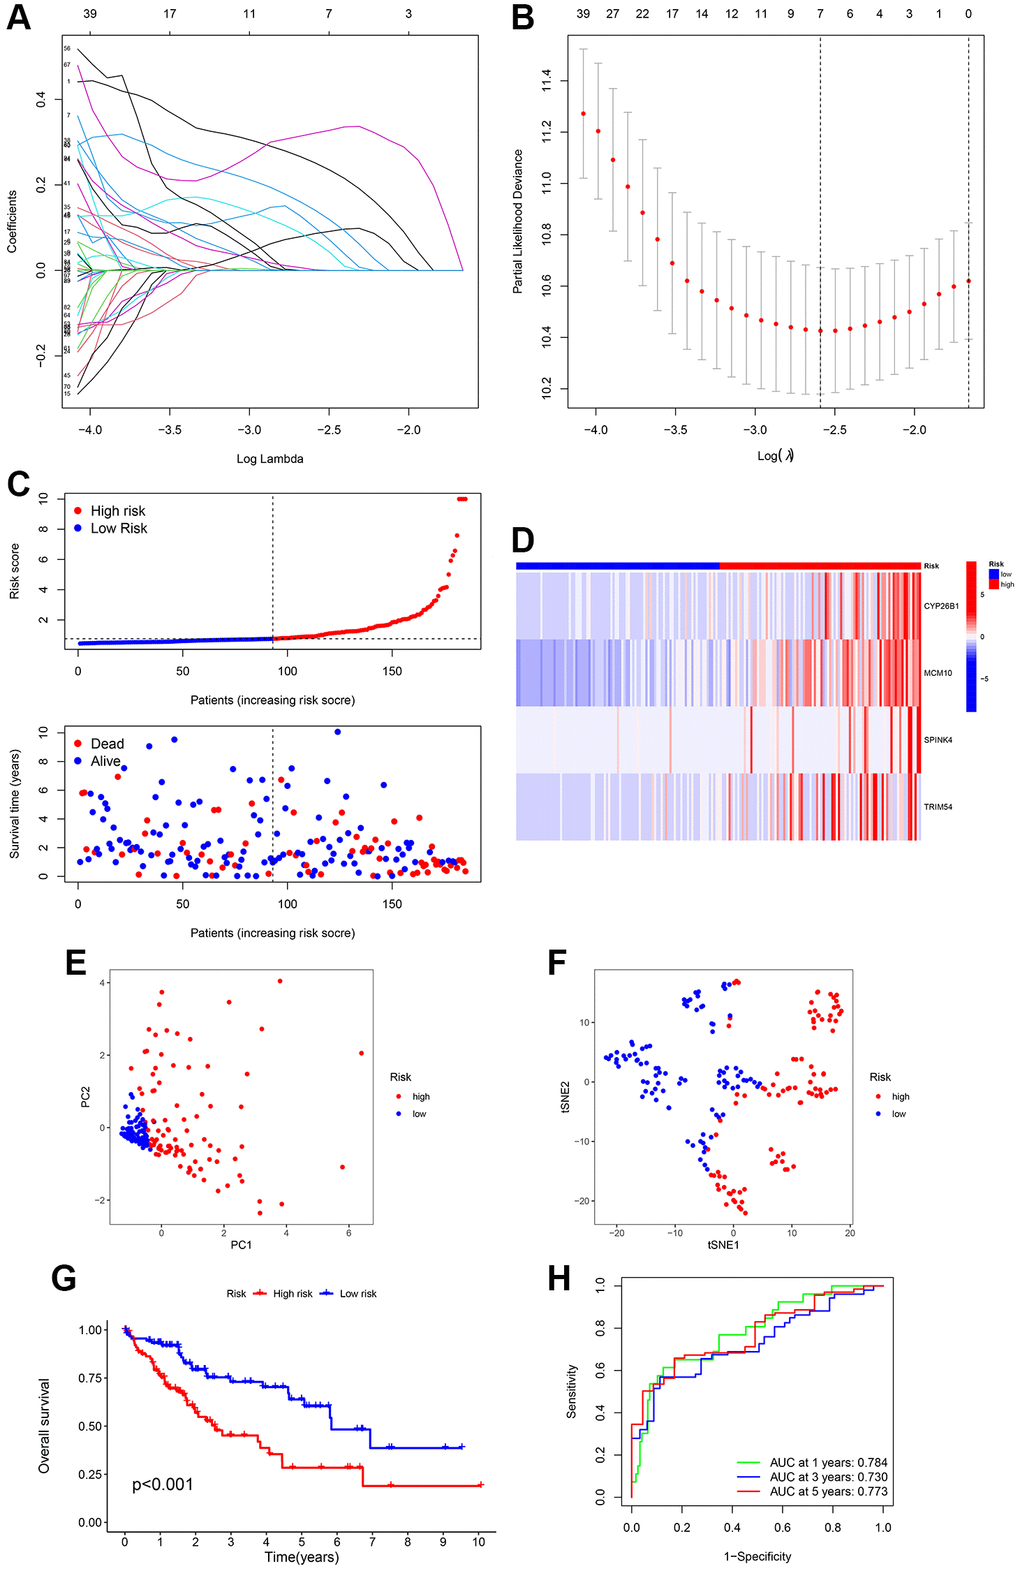 Creation of a signature related to ubiquitination from four genes in various clusters of HCC patients. LASSO Cox regression analysis penalizes genes that are expressed differentially (DEGs). (A, B) Cross-validation of potential genes using the lowest lambda value. (C) The risk score determines the survival time and status of every patient with HCC. (D) The expression of the four URGs in the low- and high-risk groups can be visualized through a heatmap. (E, F) Analysis of the signature using principal component analysis (PCA) and t-distributed stochastic neighbor embedding (t-SNE) was performed. (G) Comparative analysis of survival rates in two different risk subcategories. (H) The accuracy of the signature can be evaluated by analyzing the ROC curves for 1, 3, and 5 years.